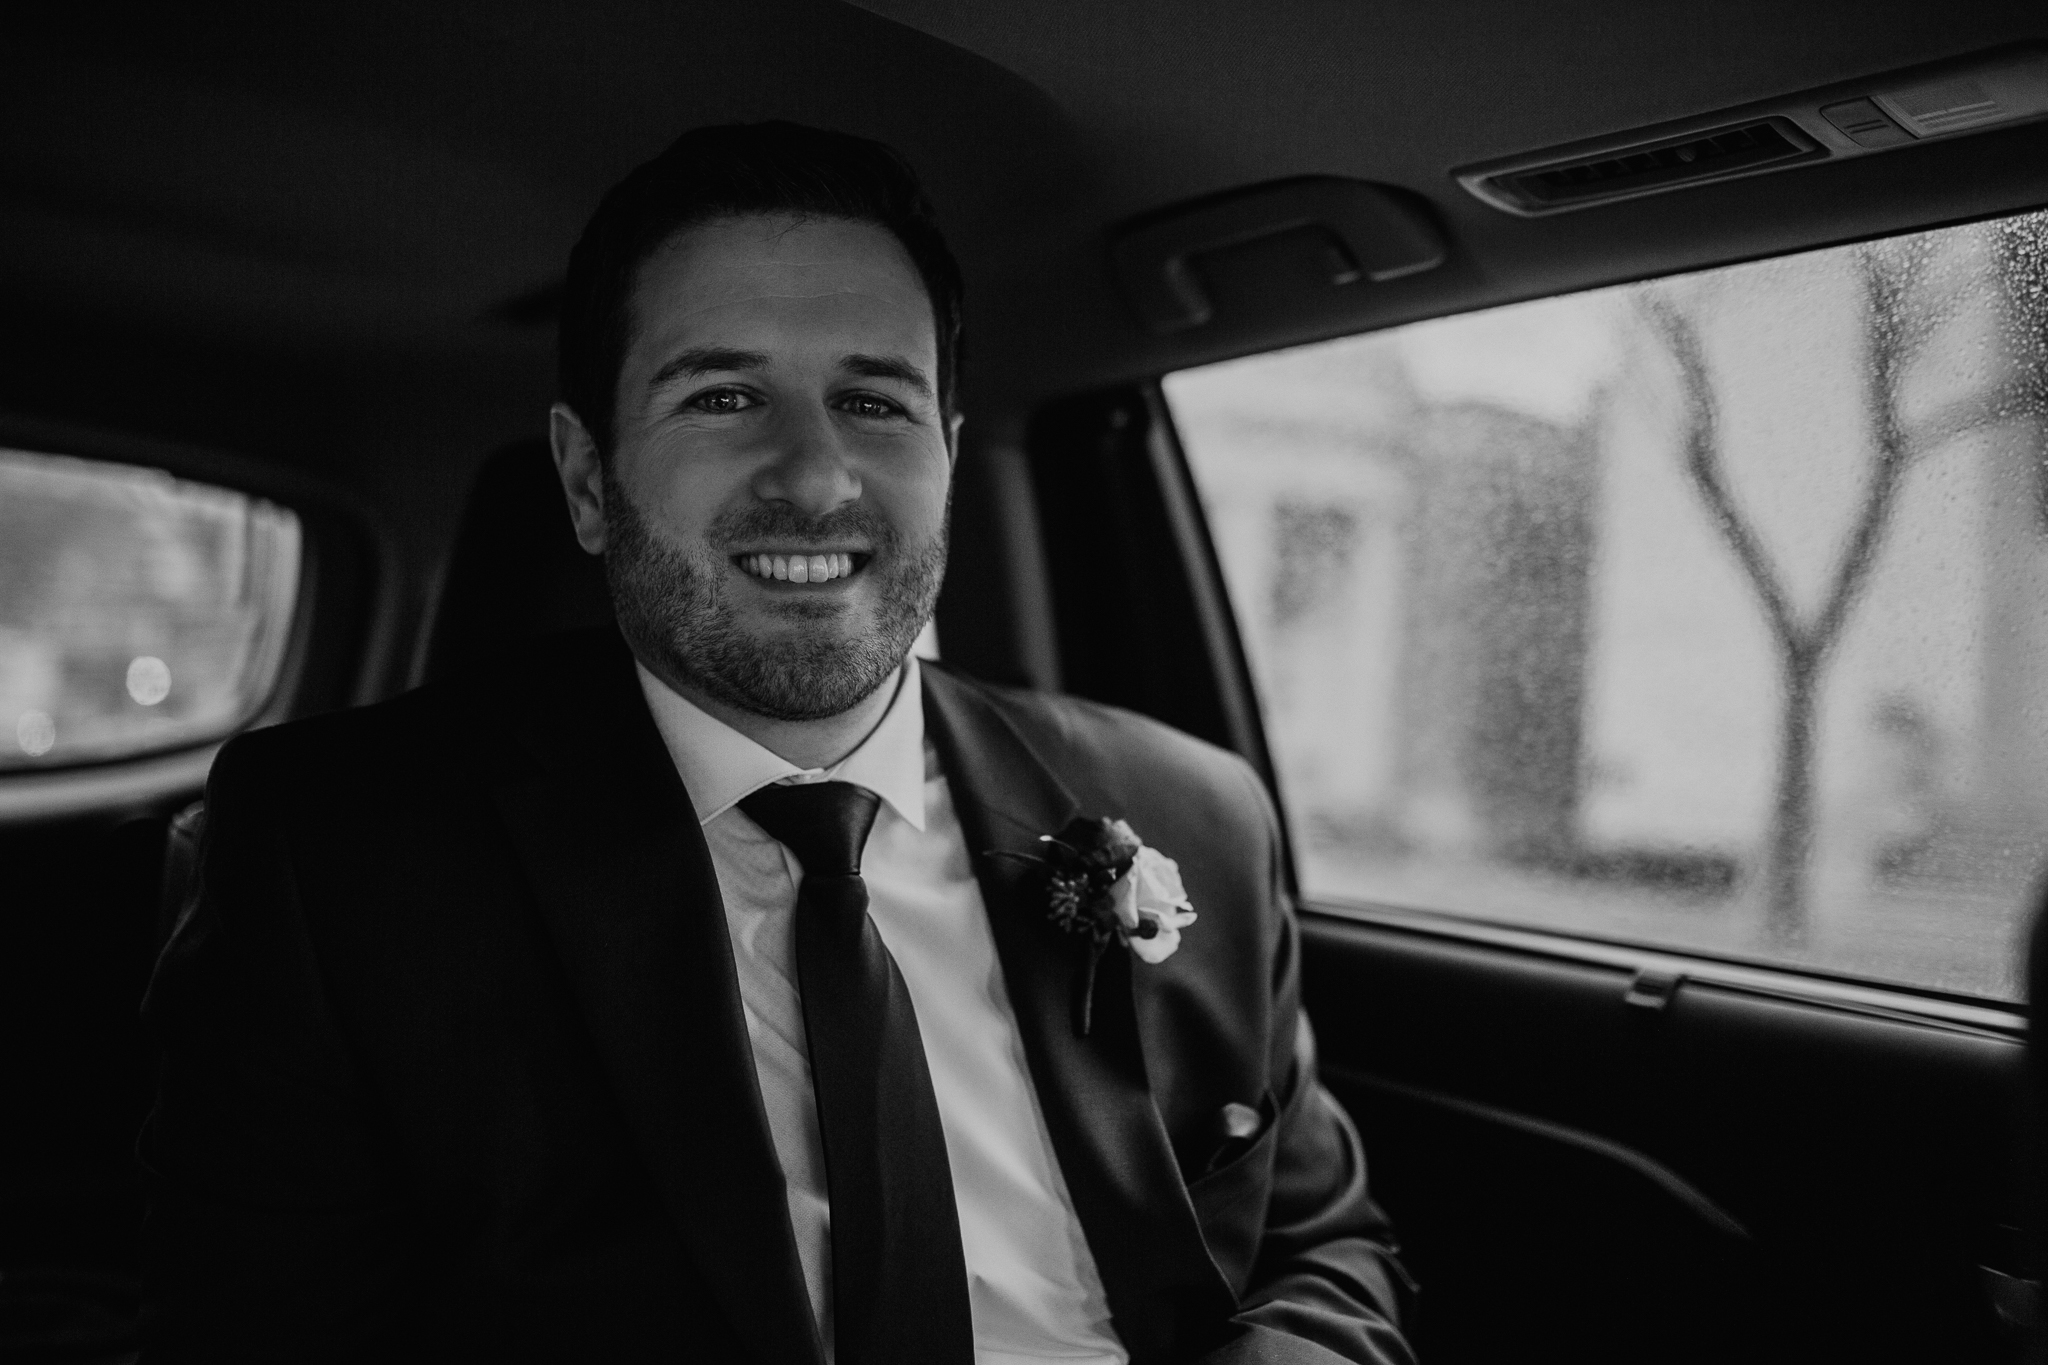 Groom smiling in the car on his way to the wedding ceremony.